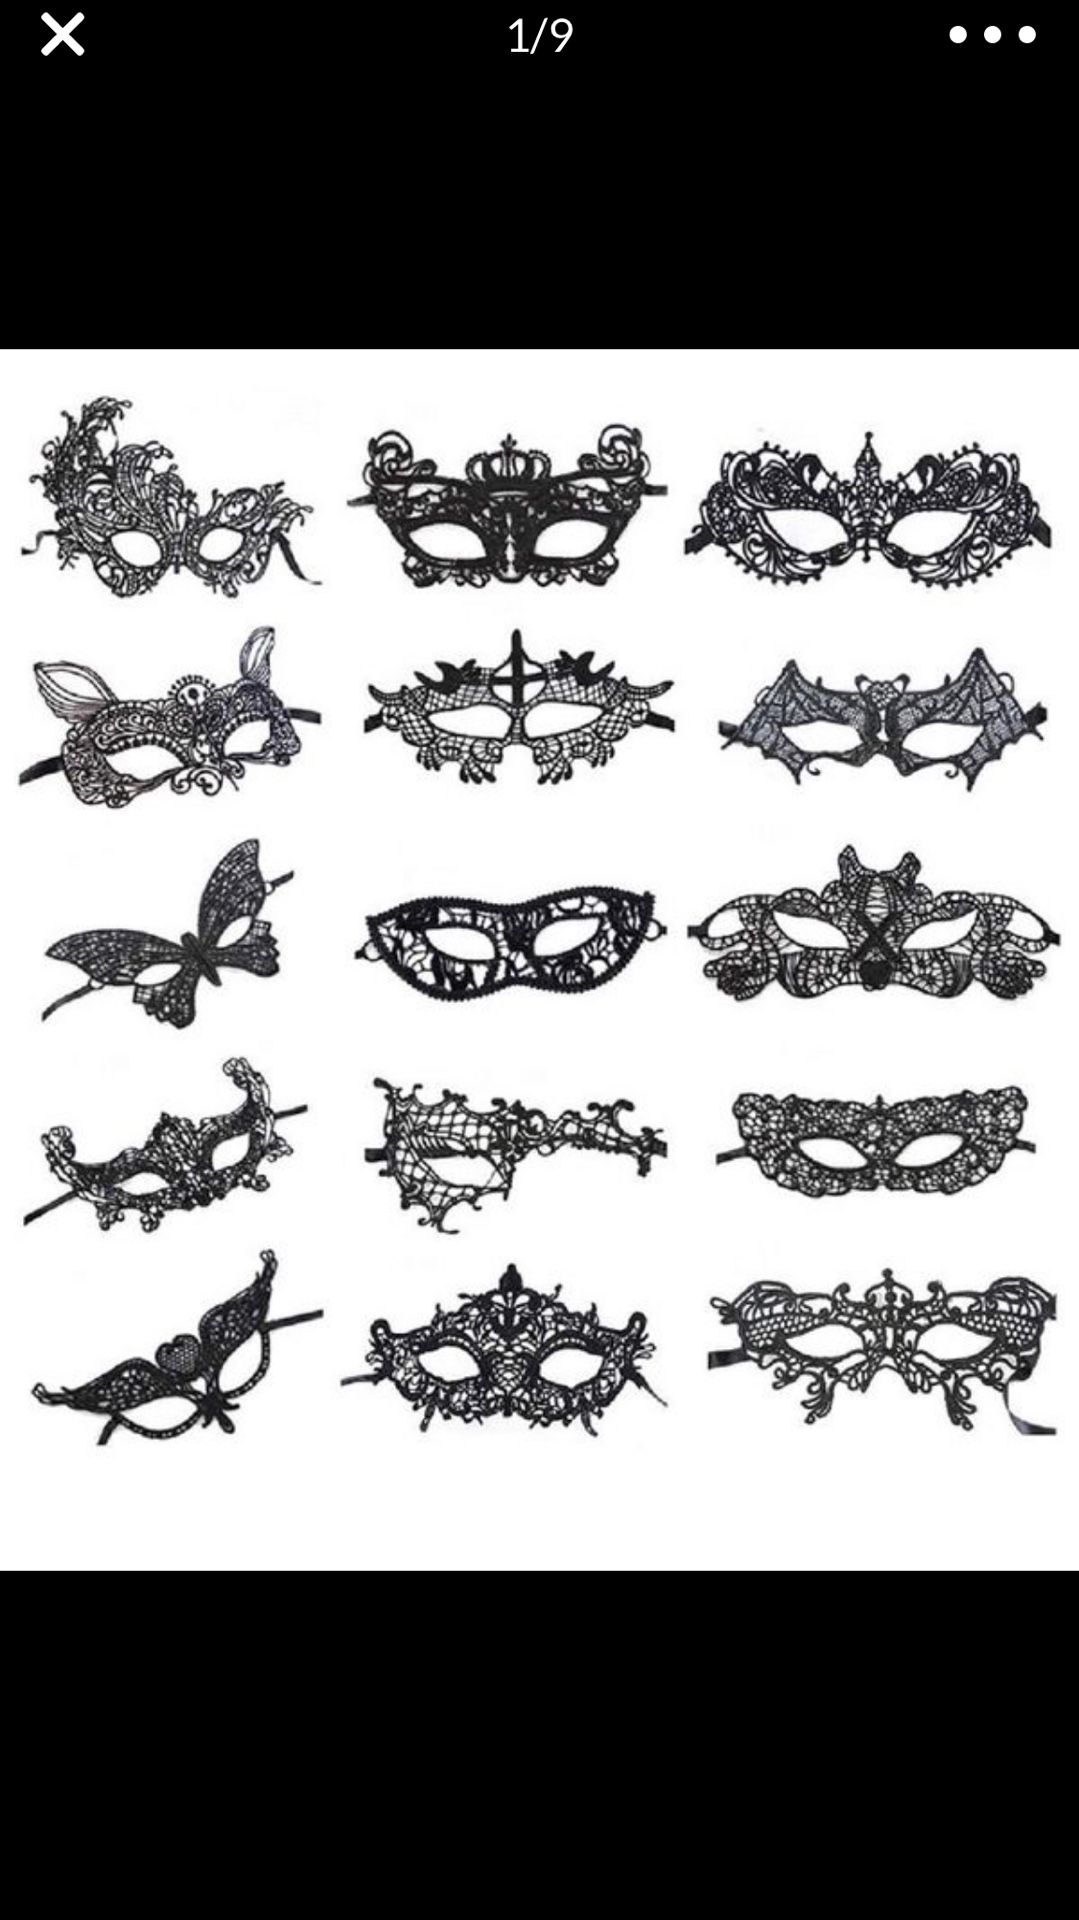 15 Pieces Lace Masquerade Mask Venetian Halloween Costume Sexy Woman Mask Exquisite High-end Lace Masquerade Mask (Black